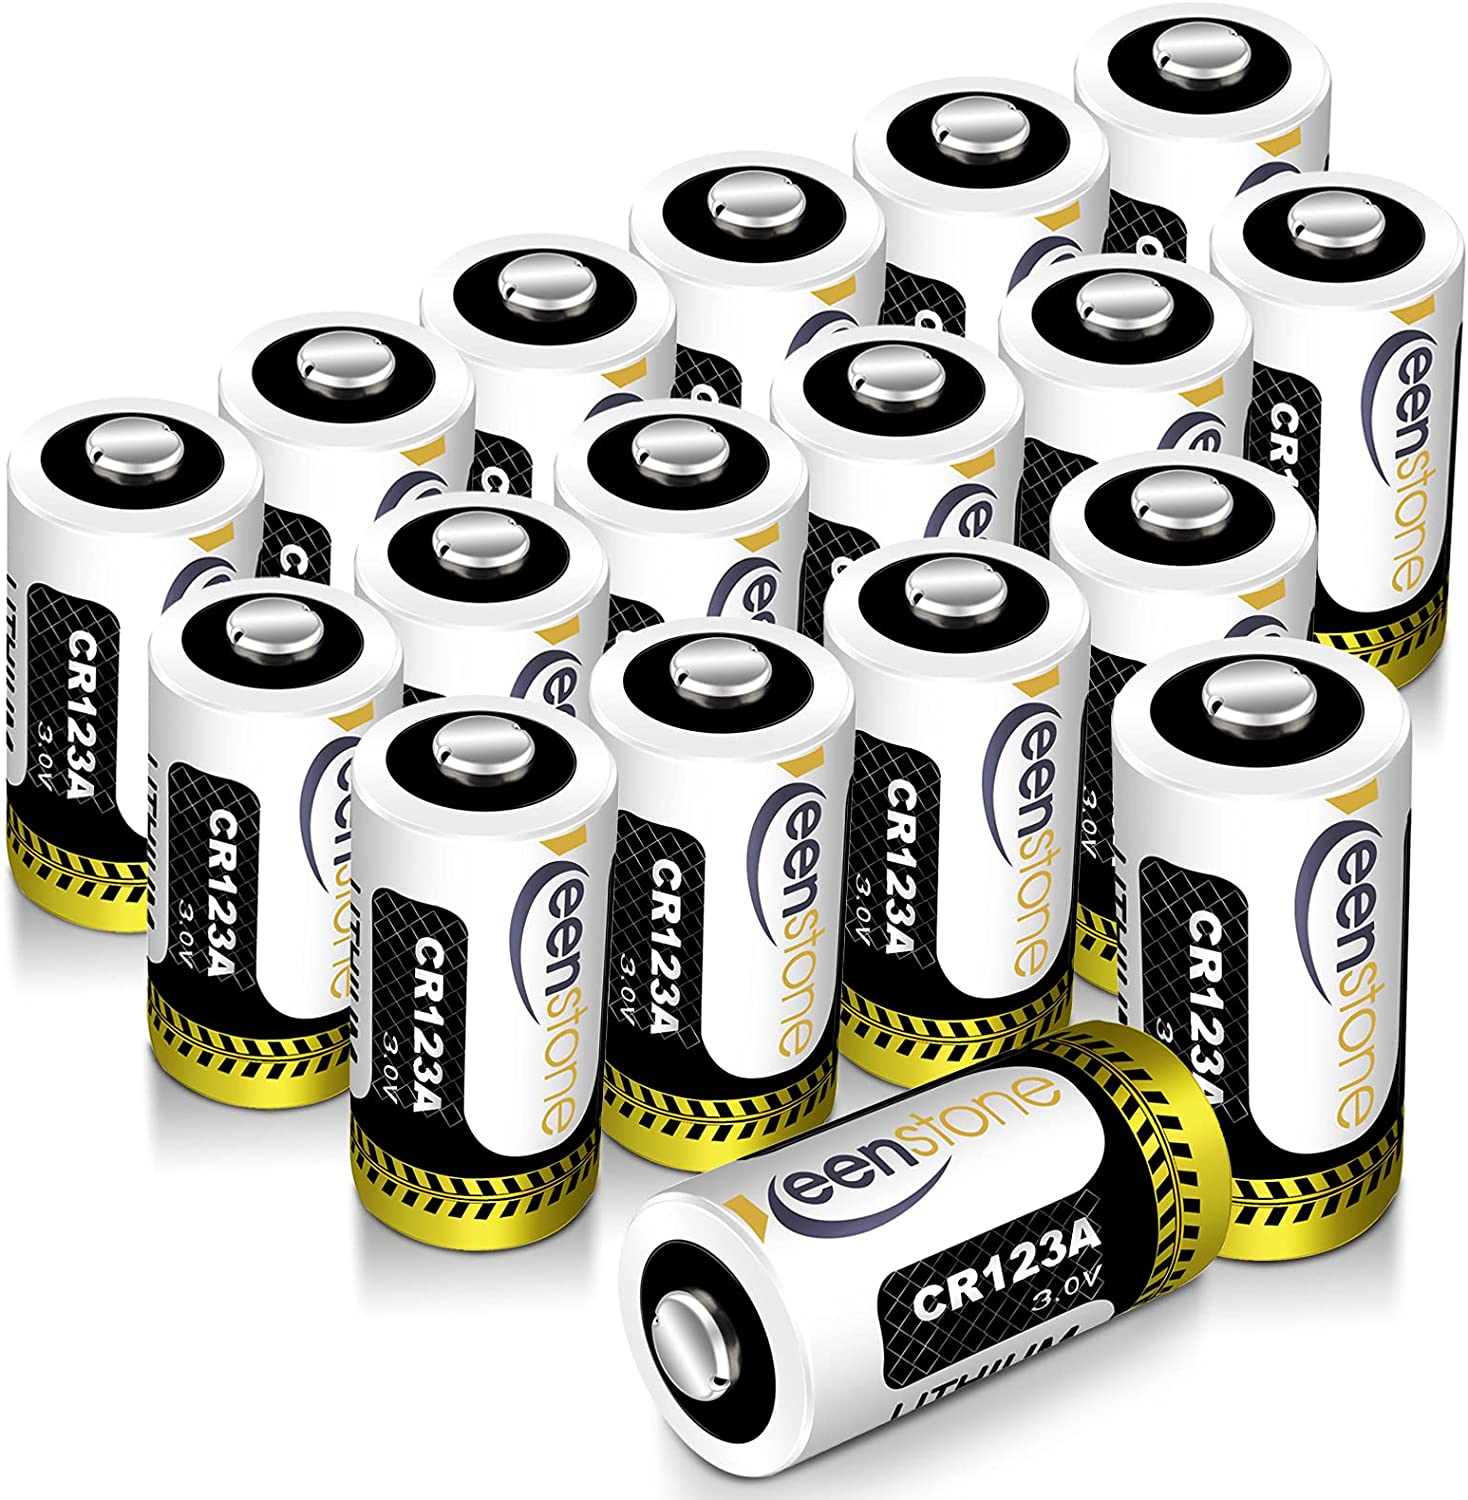 Upgraded] CR123A 3V Lithium Non-Rechargeable Batteries 1600mAh - 6